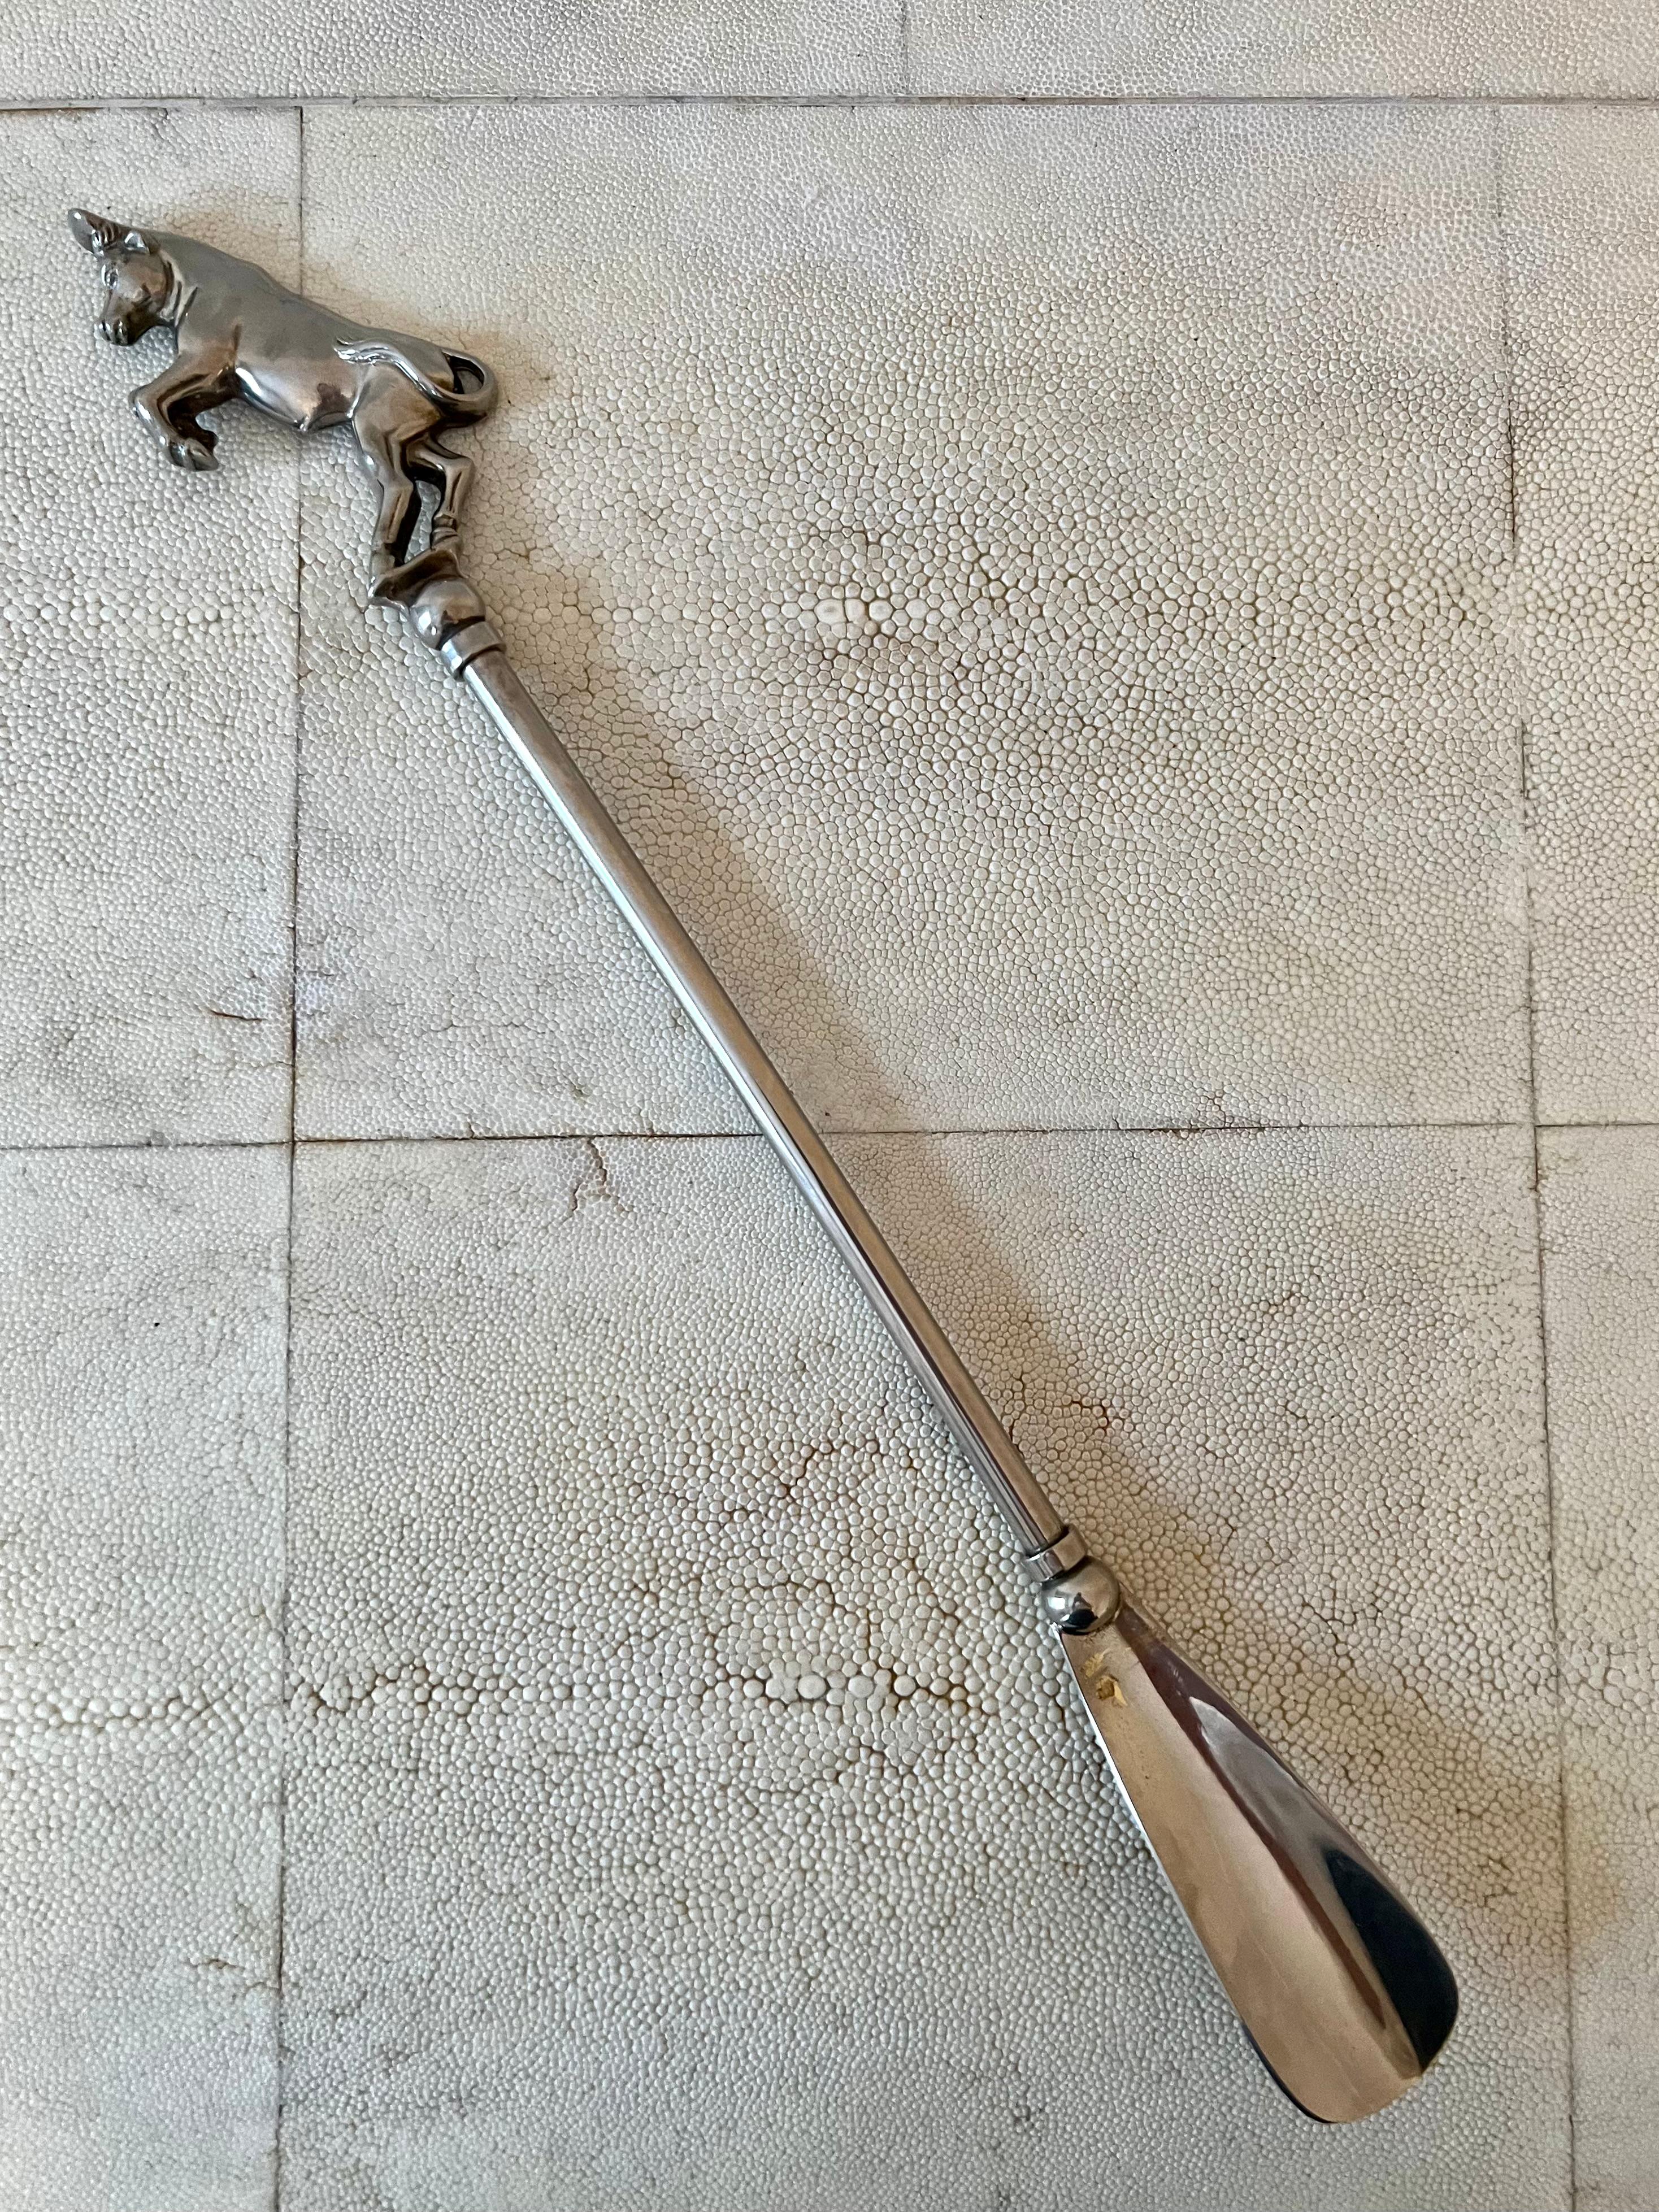 Unique silver shoehorn made in Italy with bull figure on the handle. Bull has been a symbol of fertility and power since prehistoric times. 

Stamped 